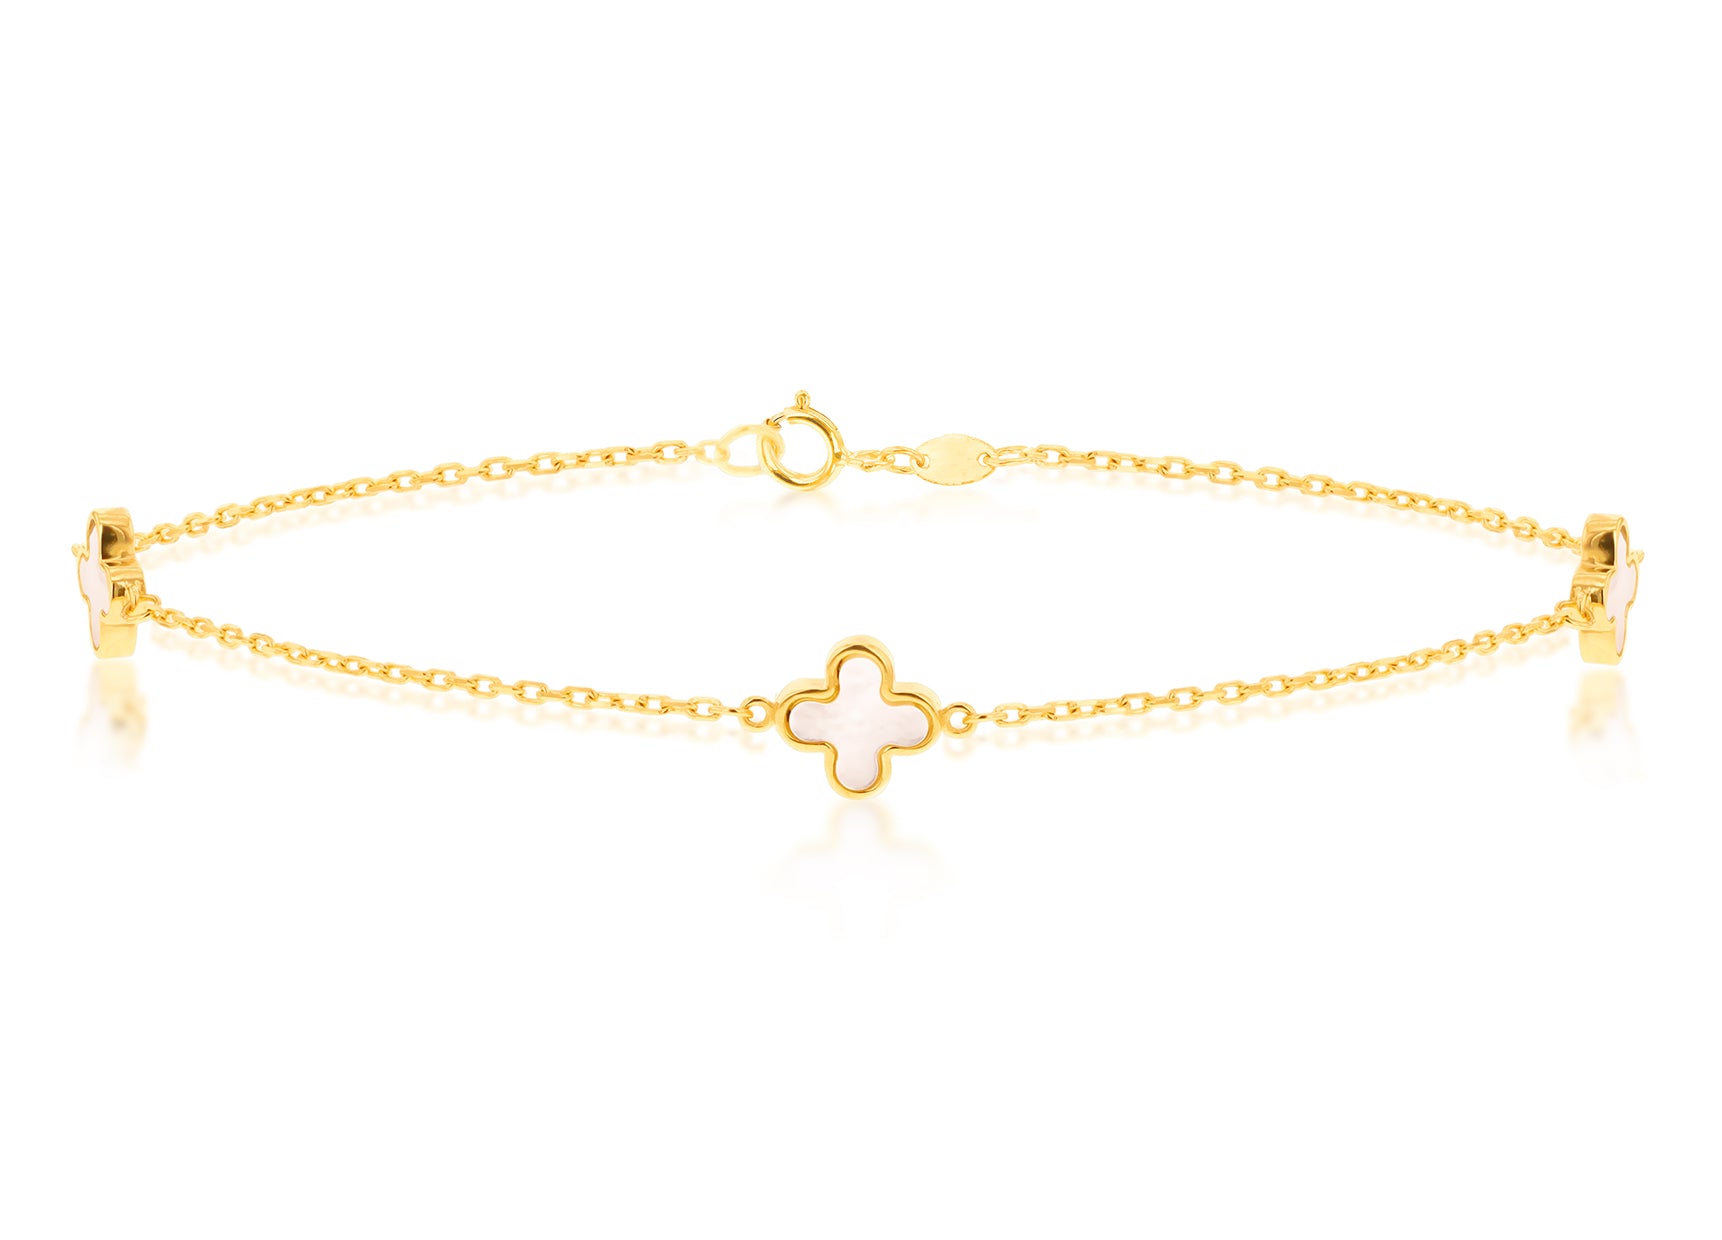 Mother of Pearl 4 Leaf Clover Bracelet in Yellow Gold